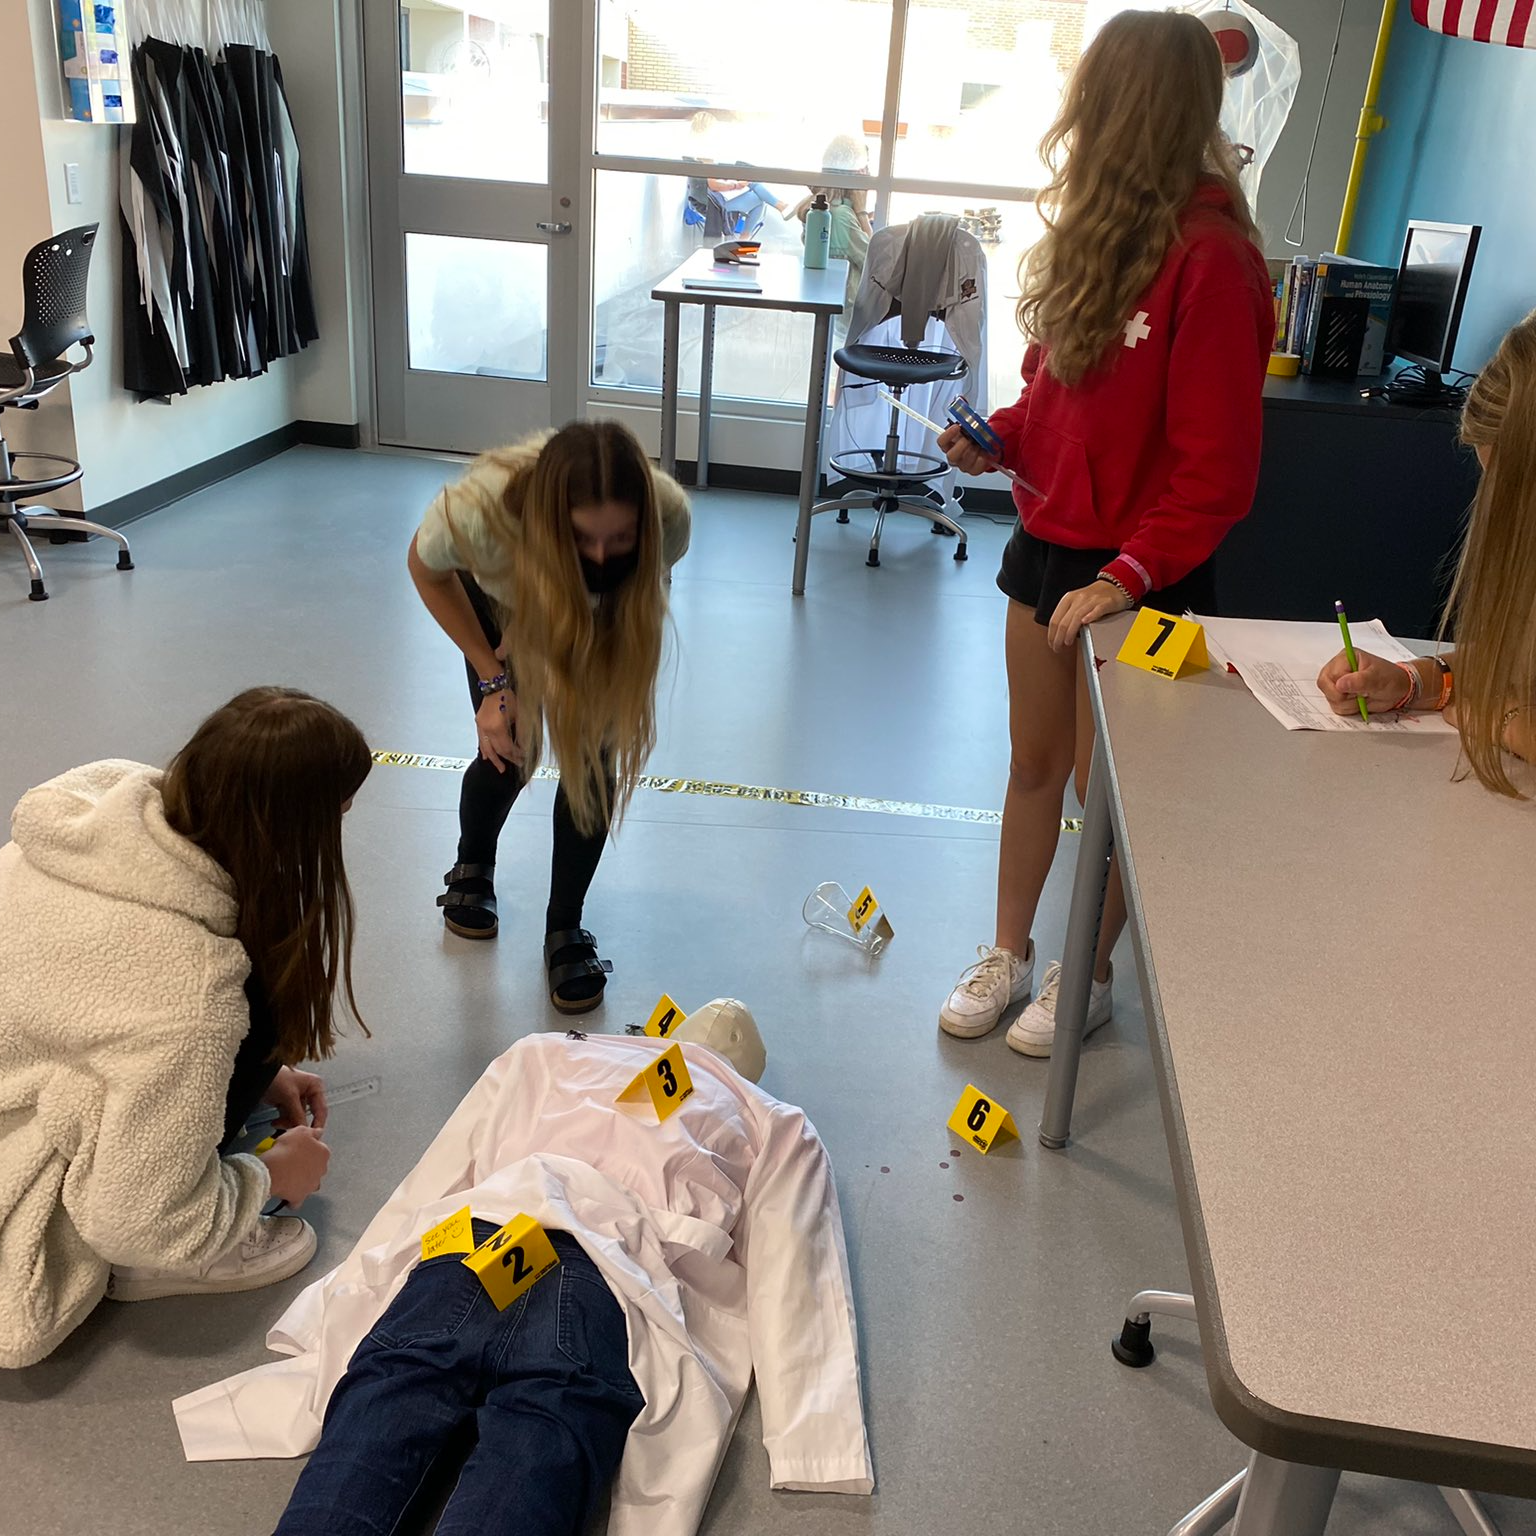 forensics looking at a manequin body